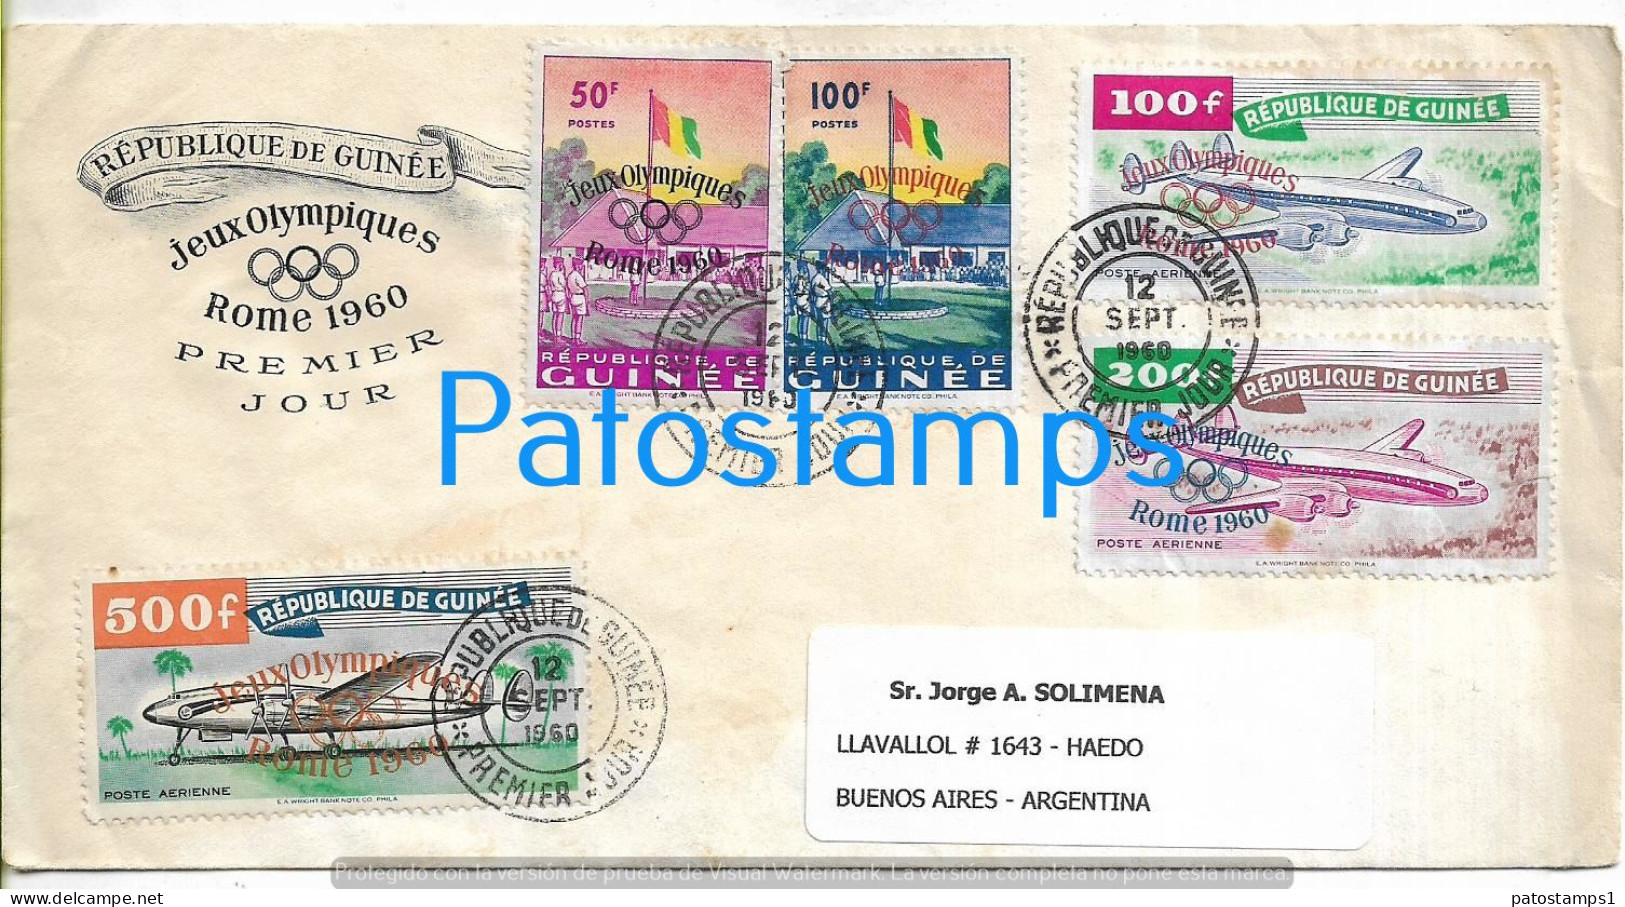 226331 AFRICA REPUBLIC GUINEE COVER CANCEL YEAR 1960 OLYMPIC GAMES CIRCULATED TO ARGENTINA NO POSTCARD - Africa (Varia)